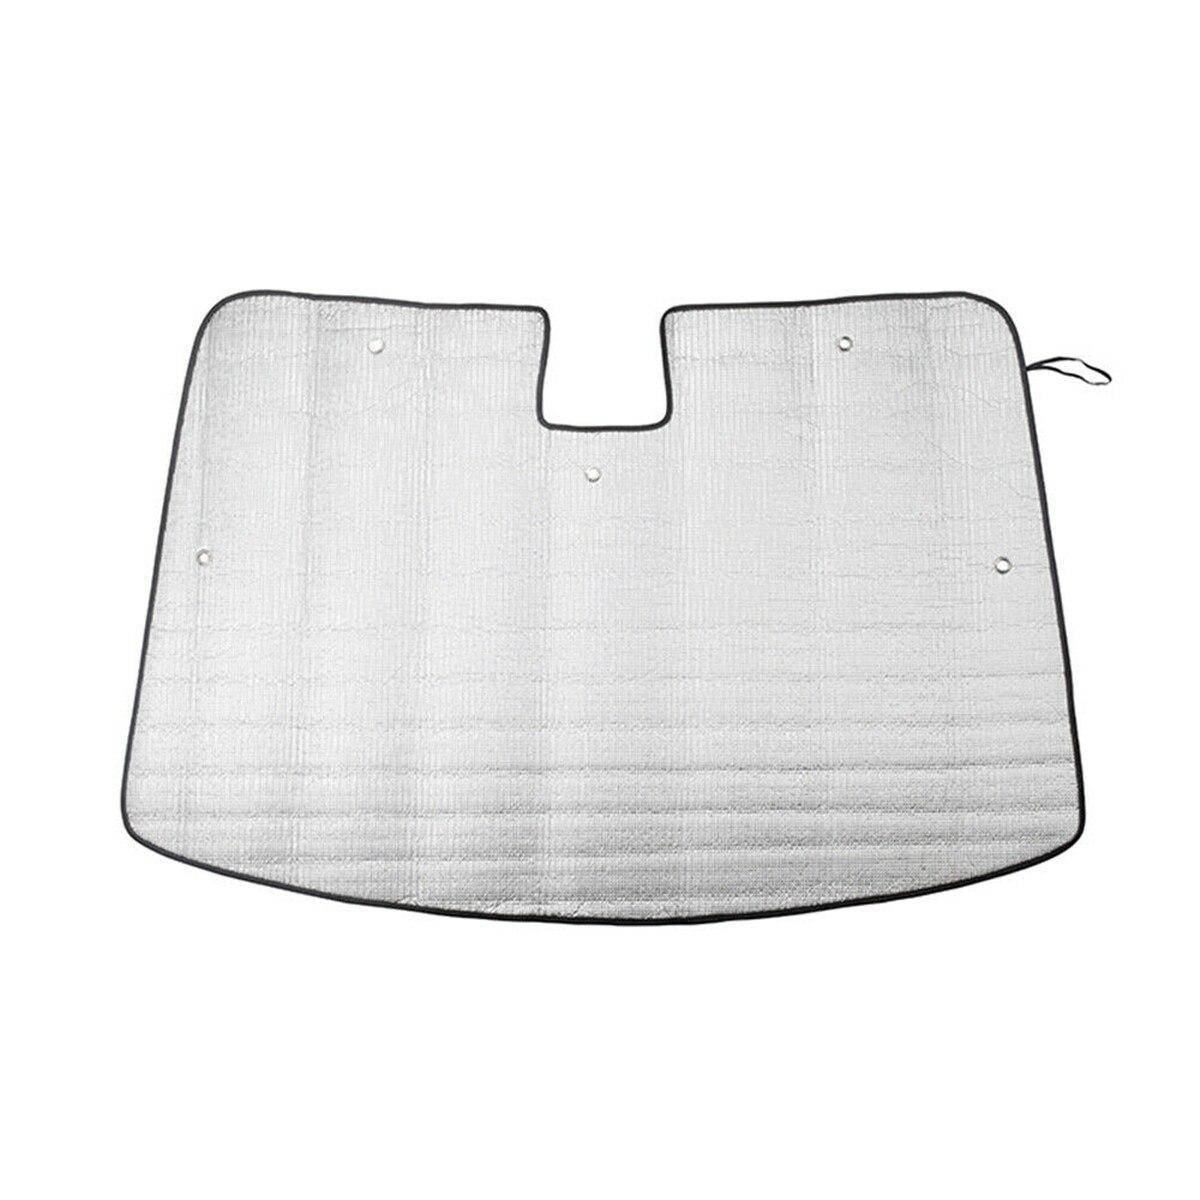 Windshield Sun Protection Cover Car Covers Car Extras & Accessories